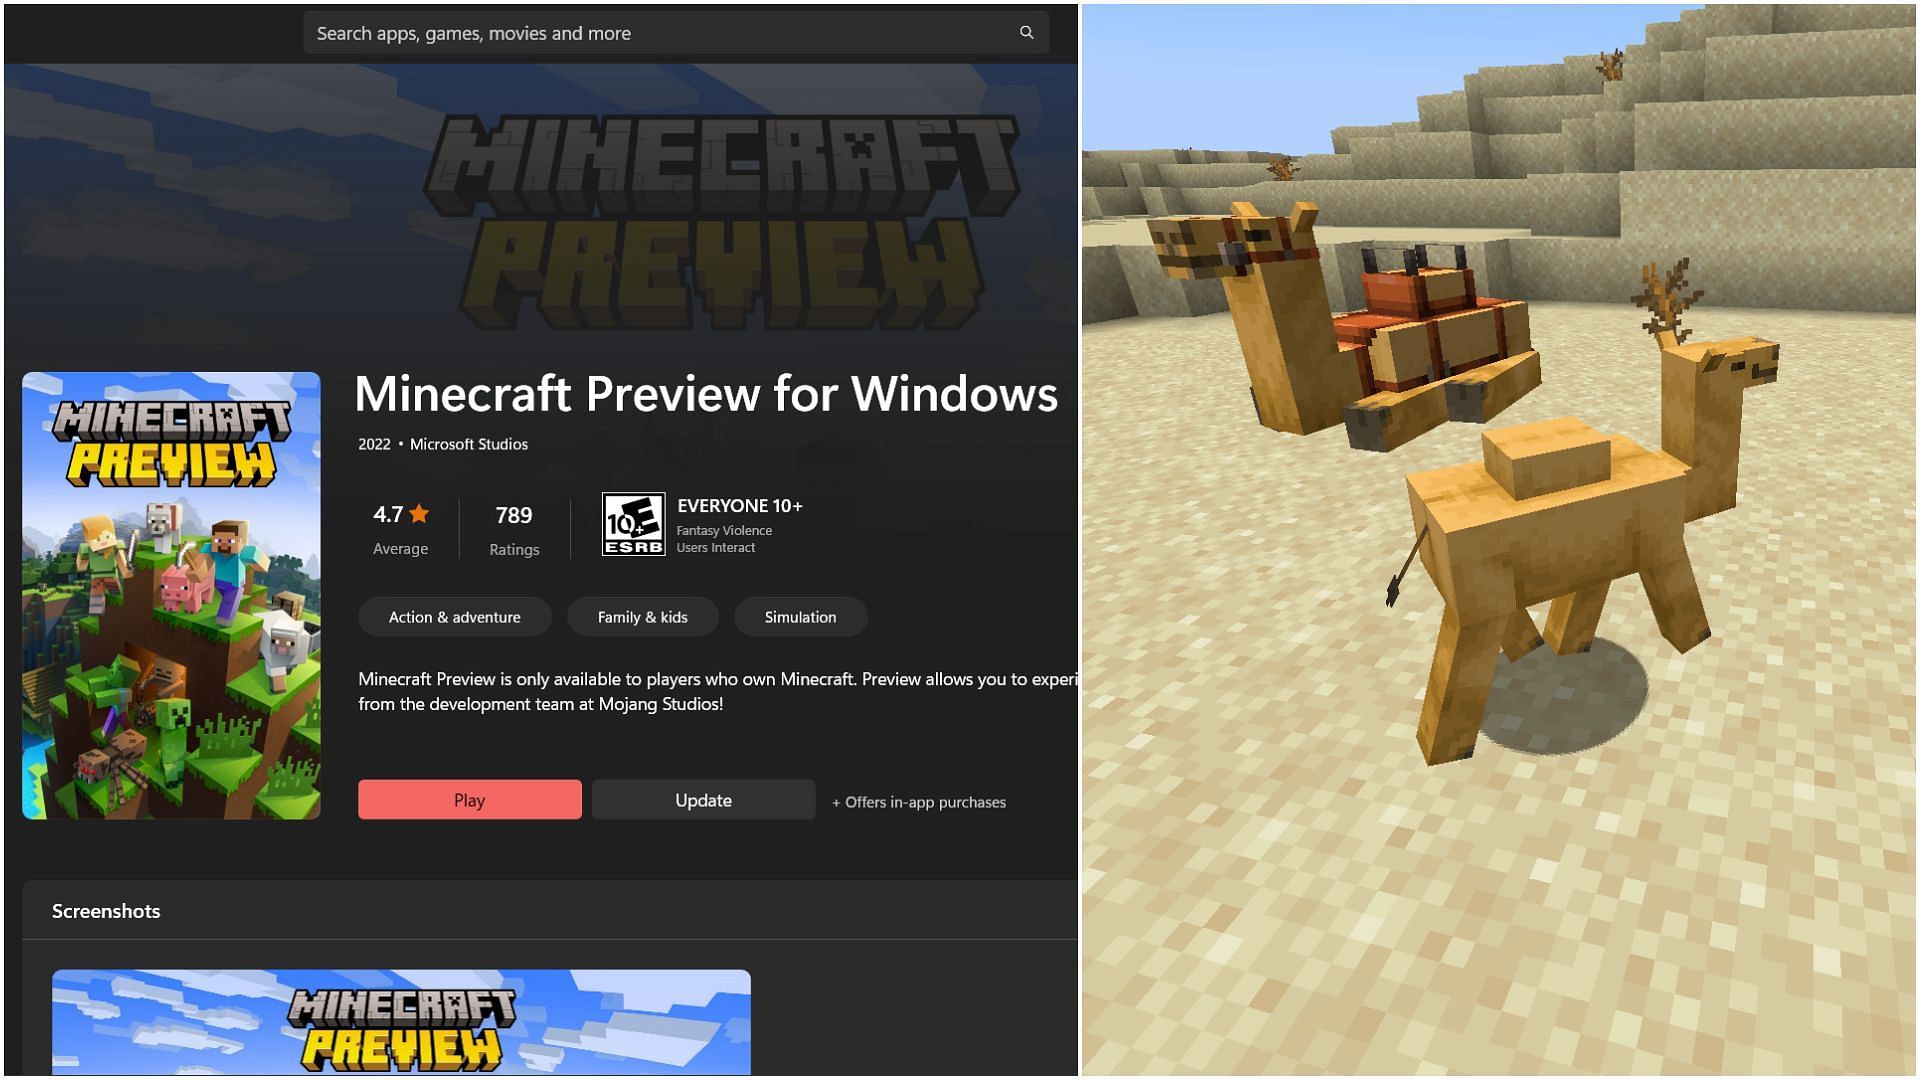 Minecraft Preview 1.19.50.20 improves vanilla parity and Spectator Mode